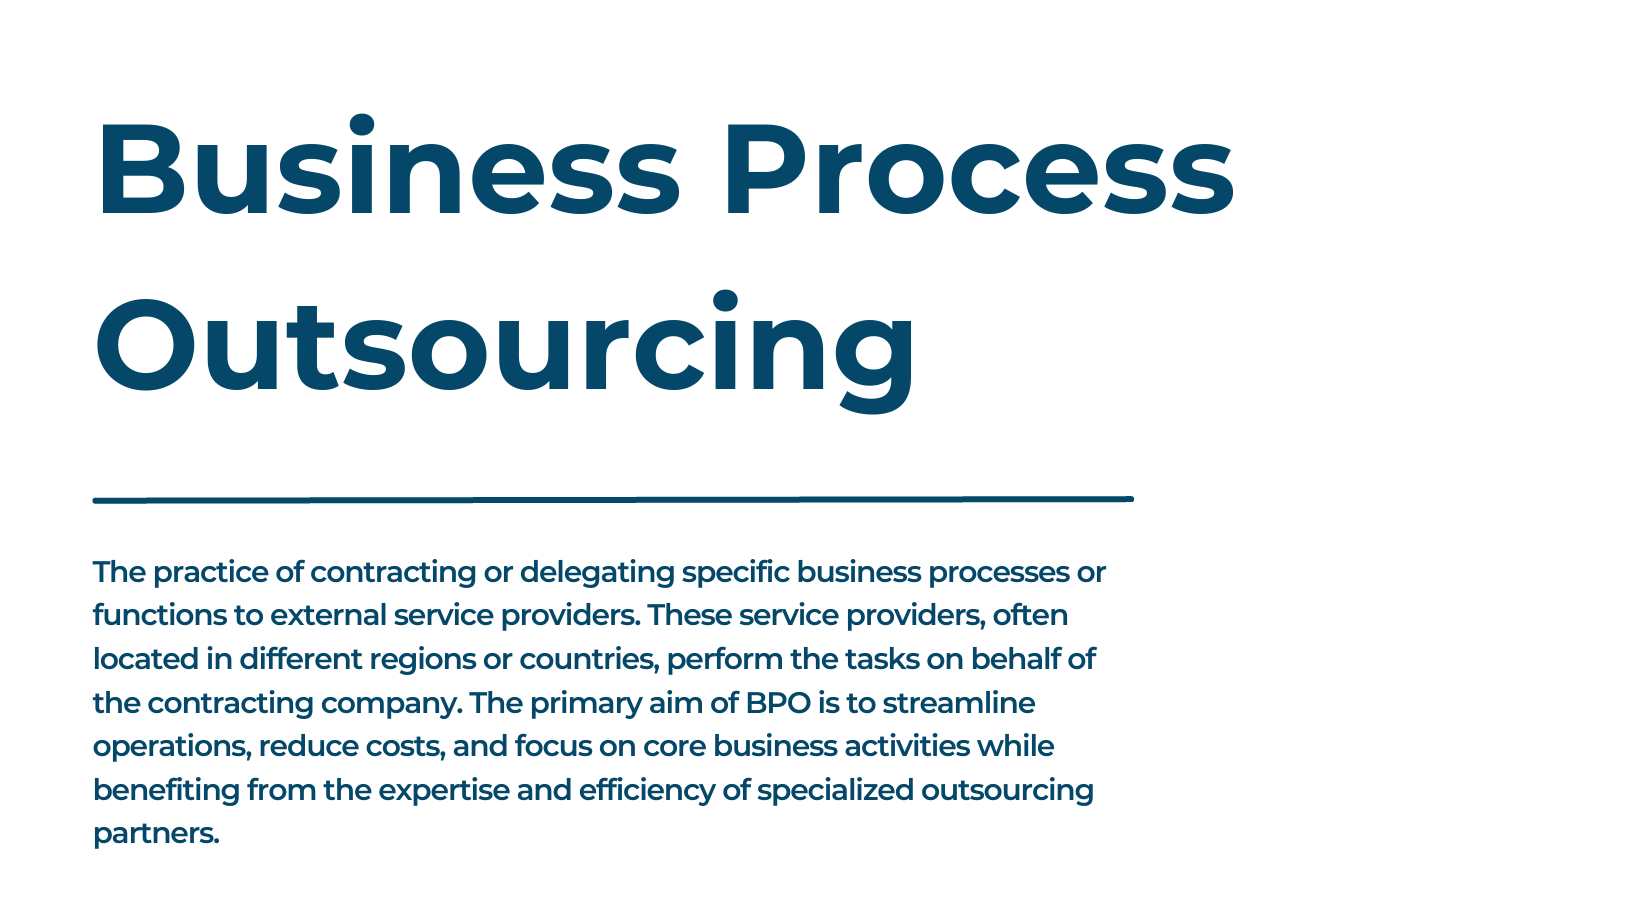 Business Process Outsourcing The practice of contracting or delegating specific business processes or functions to external service providers. These service providers, often located in different regions or countries, perform the tasks on behalf of the contracting company. The primary aim of BPO is to streamline operations, reduce costs, and focus on core business activities while benefiting from the expertise and efficiency of specialized outsourcing partners.